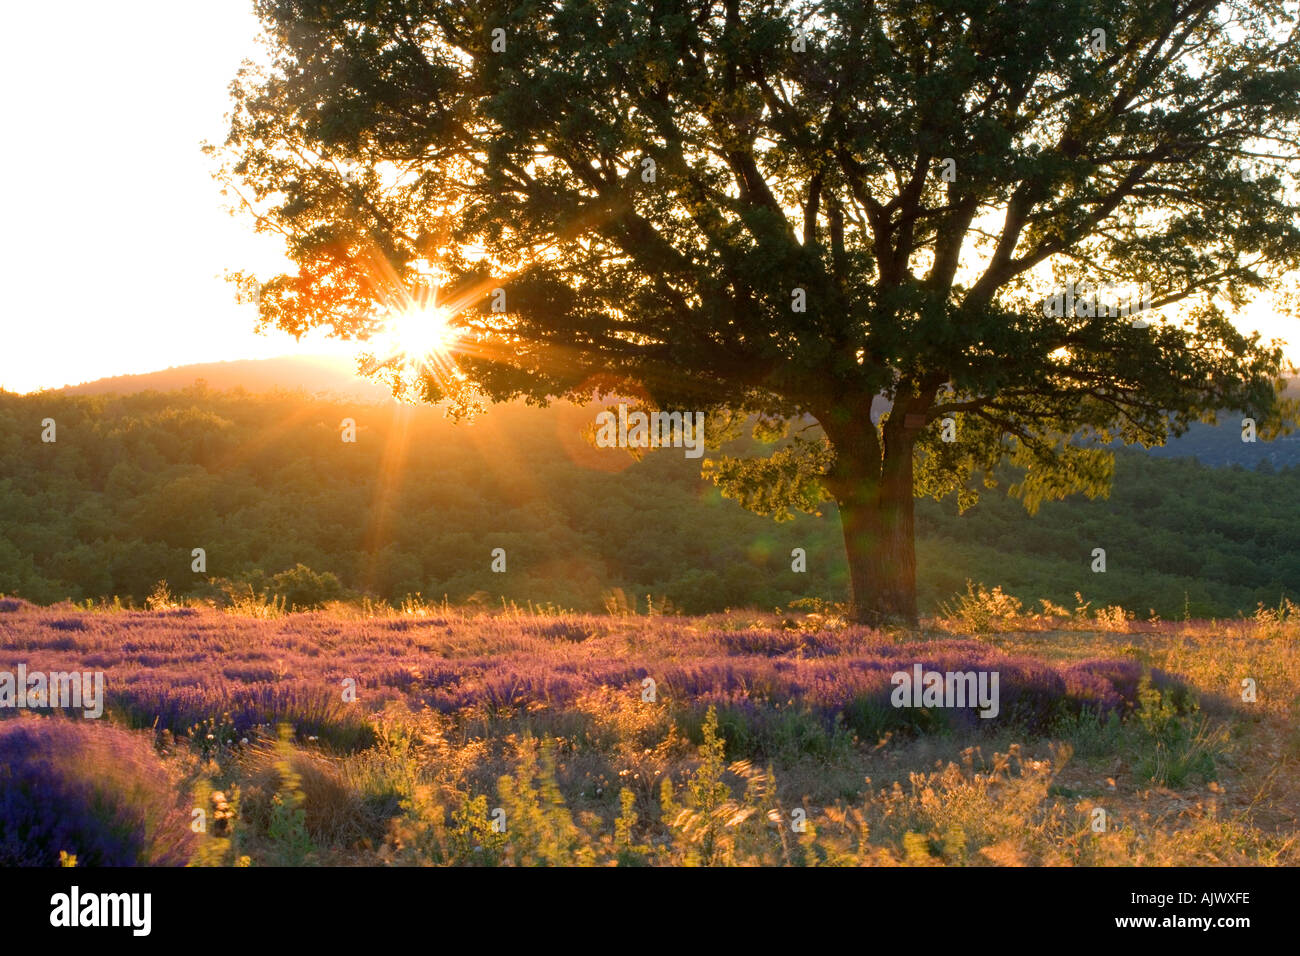 France Provence Vaucluse region Sunset through tree over lavender field Stock Photo